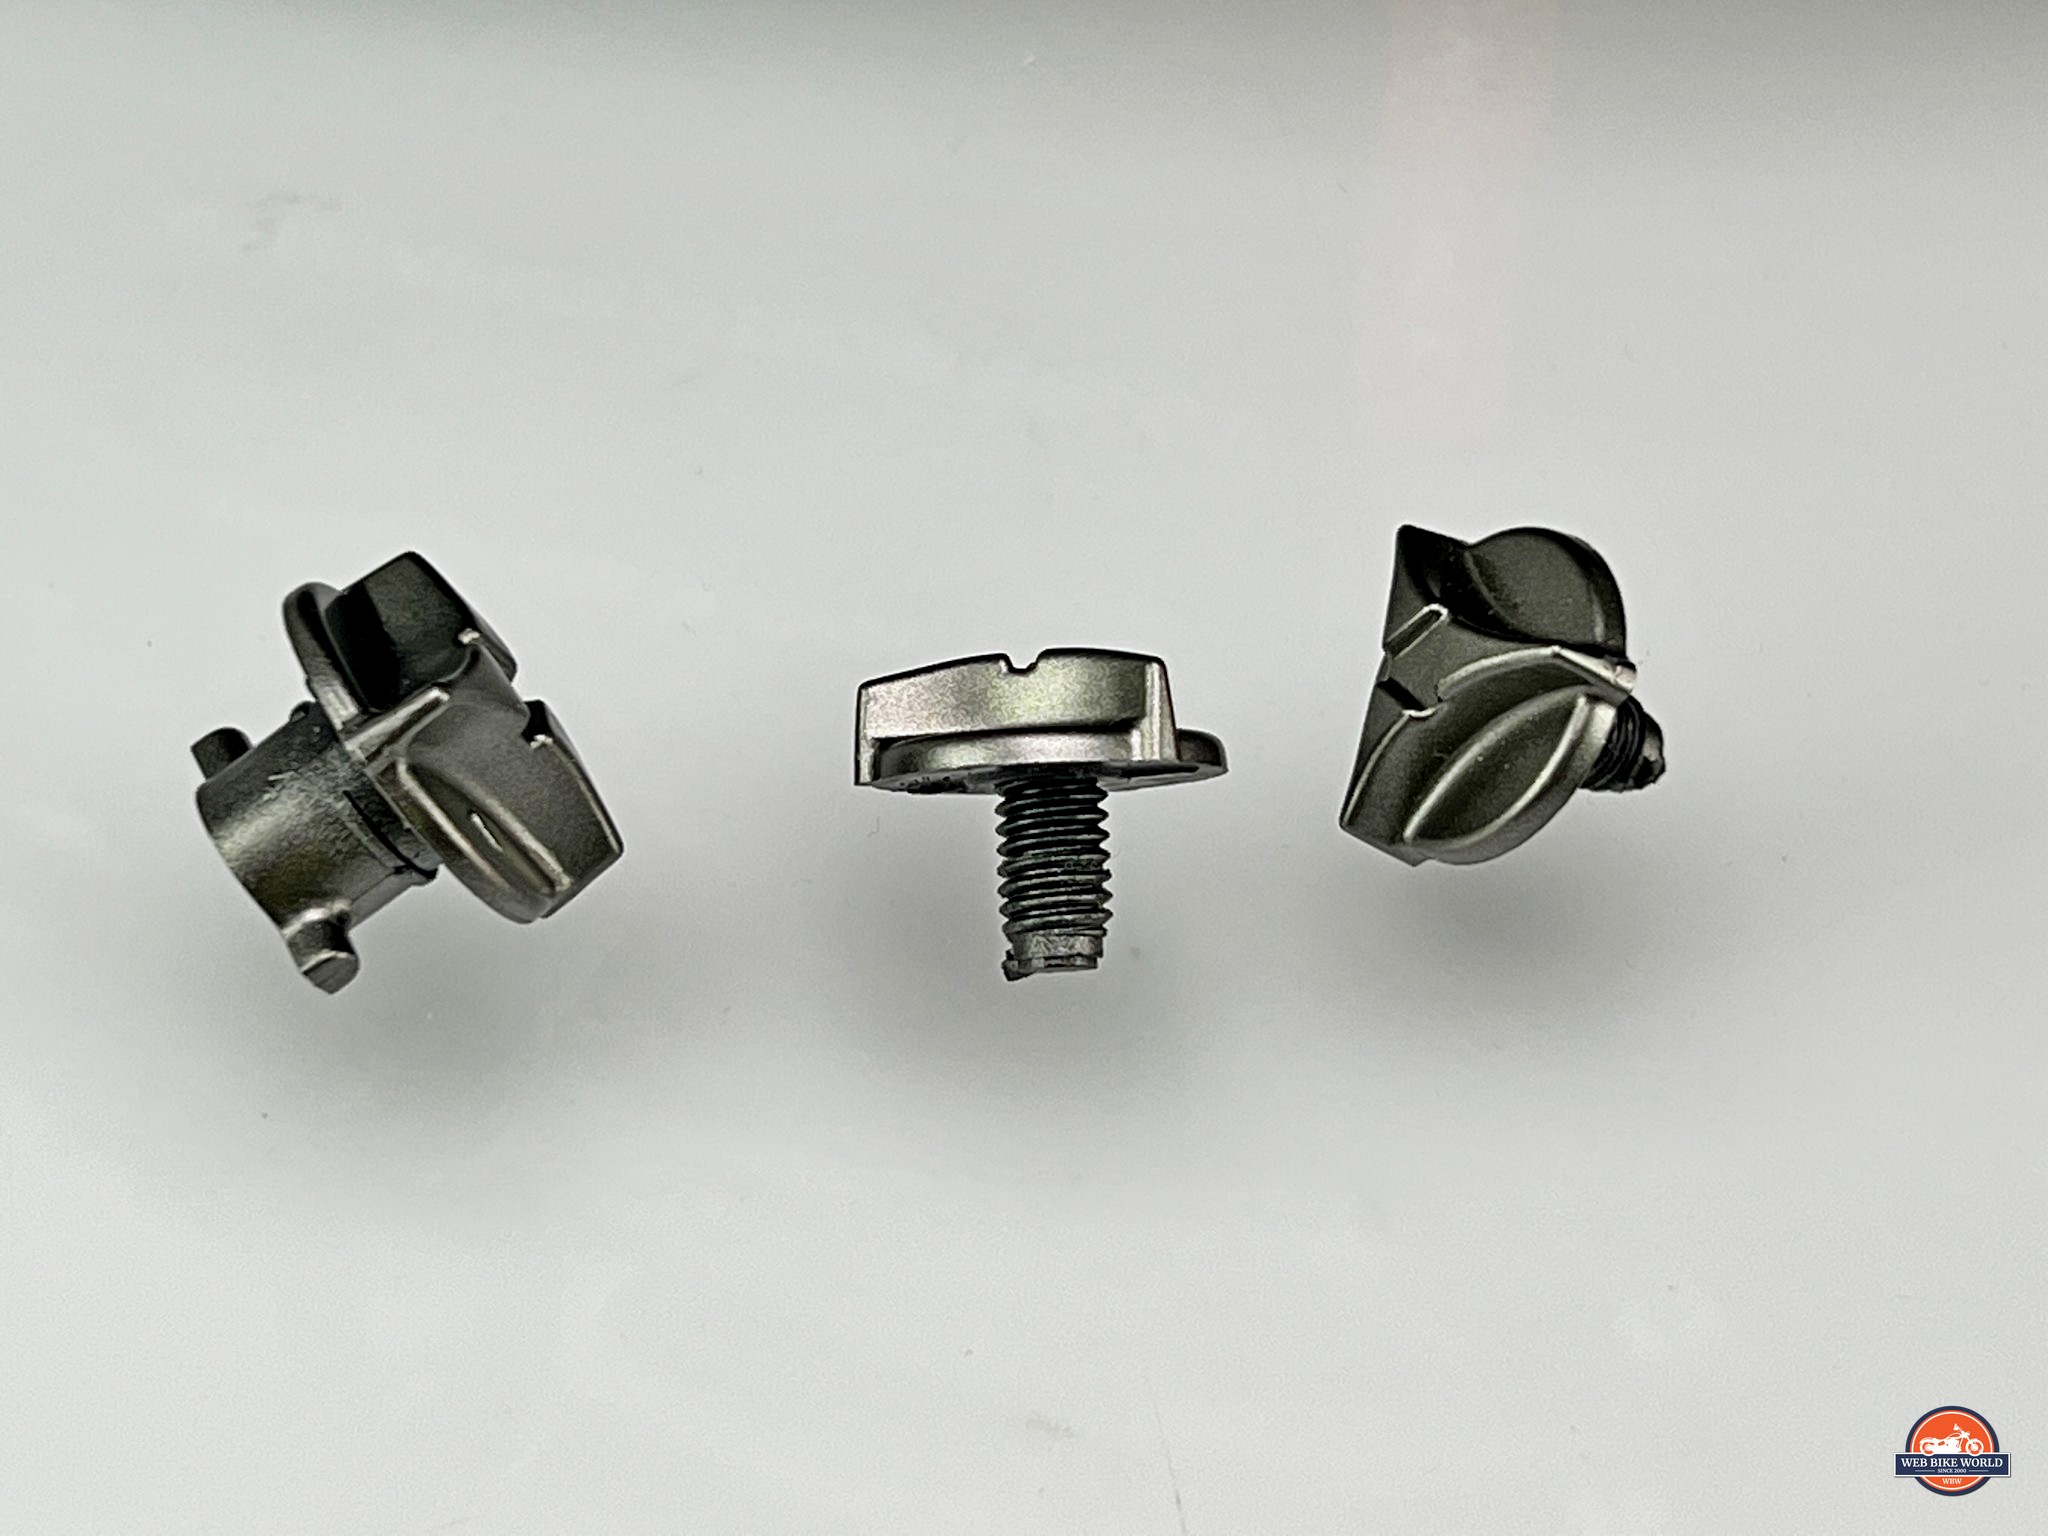 These three fasteners hold the sun peak on the XT9000